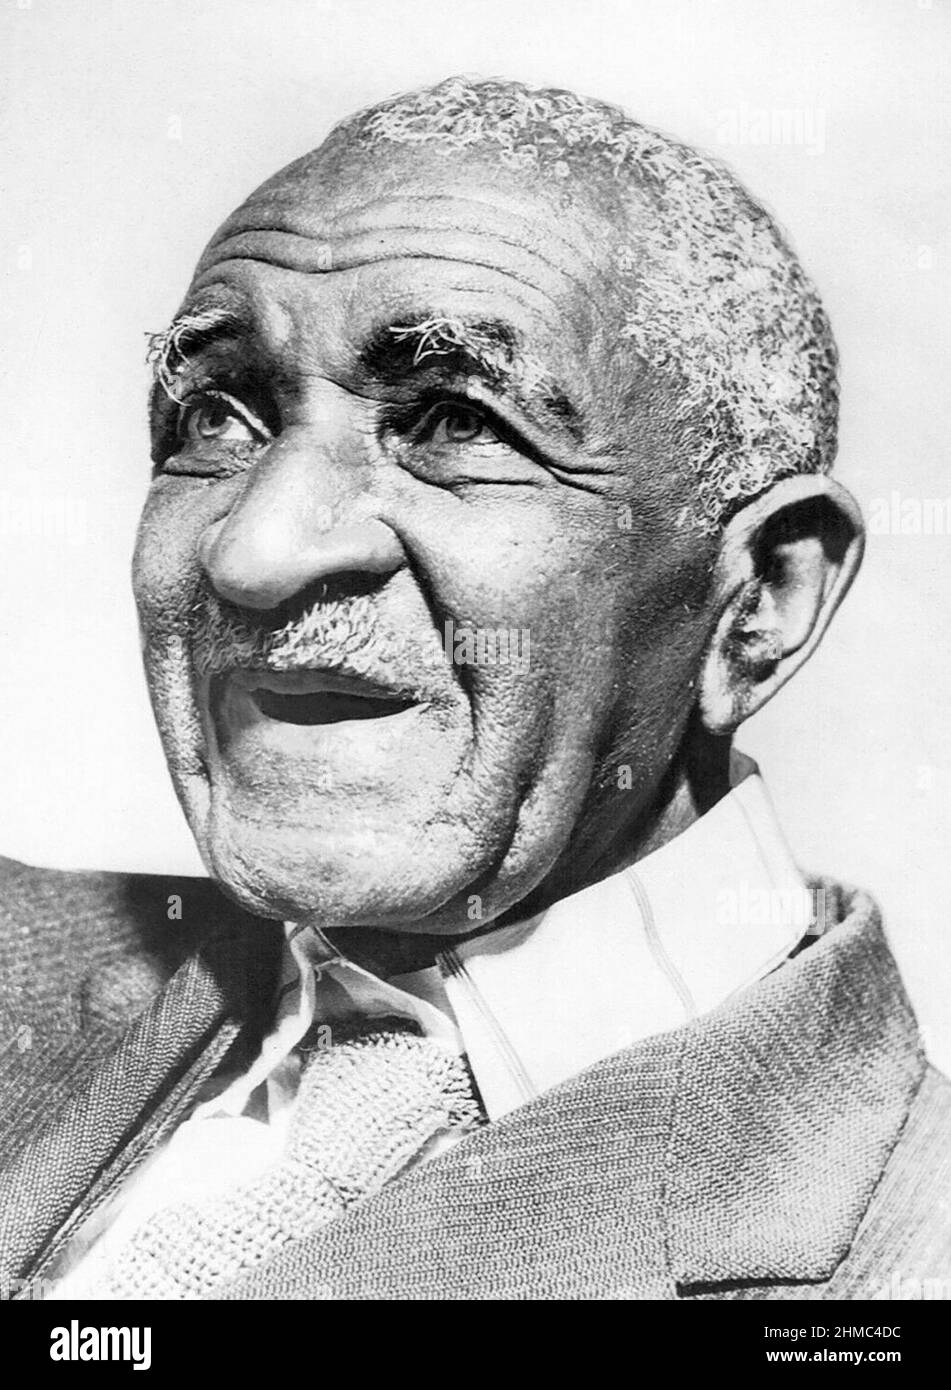 George Washington Carver (c1864-1943), American agricultural scientist, inventor, and professor at Tuskegee Institute in Tuskegee, Alabama. Photo: 1943. (USA) Stock Photo